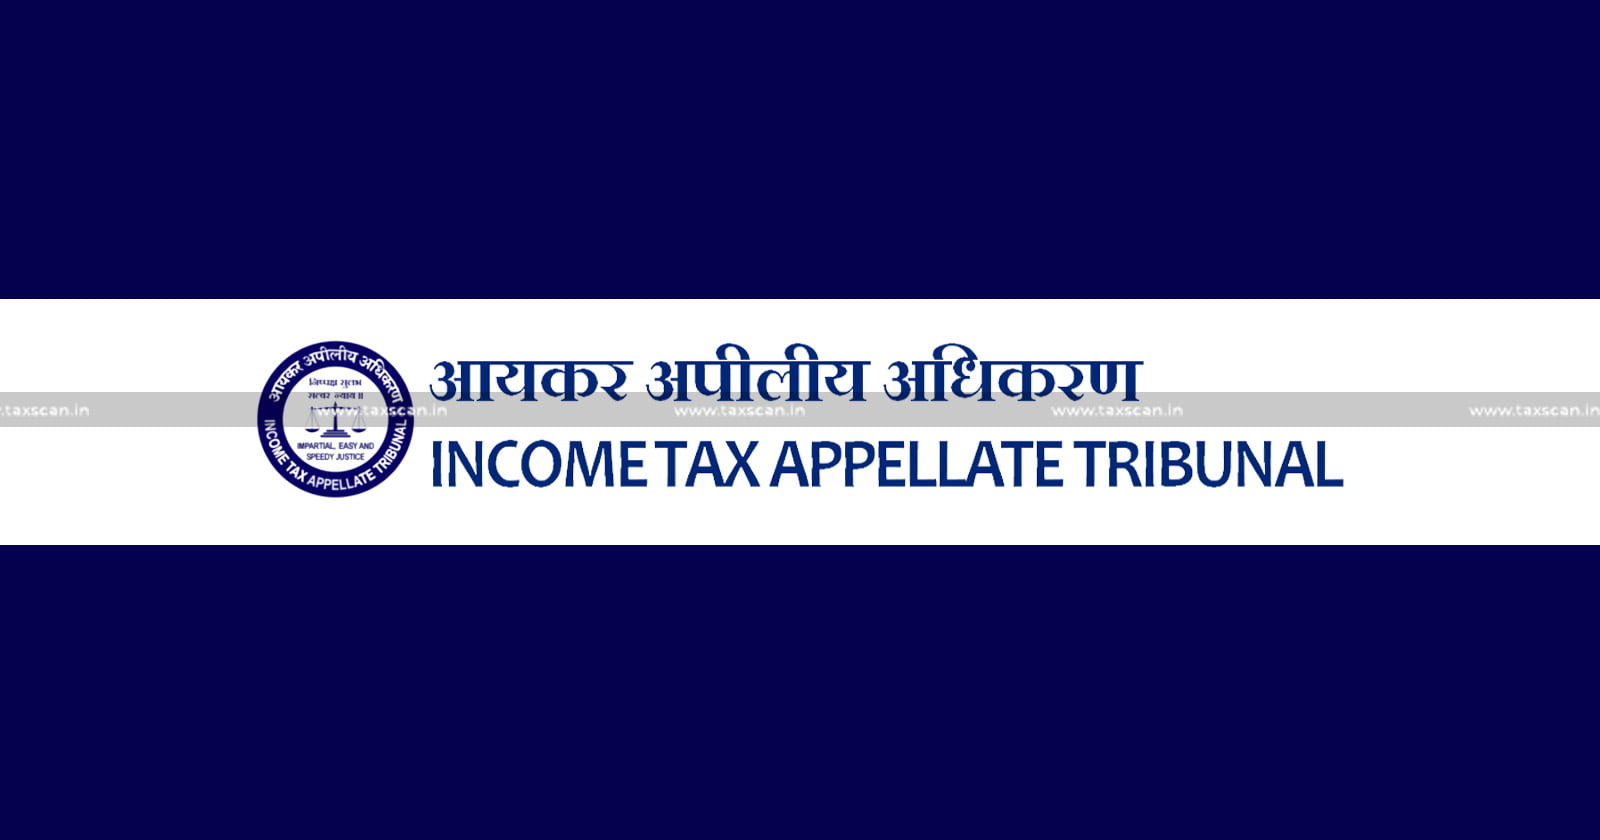 itat bangalore - redeposit in account - income tax act - ITAT ruling on sum redeposit in account - ITAT decision on long-term sum retention - taxscan